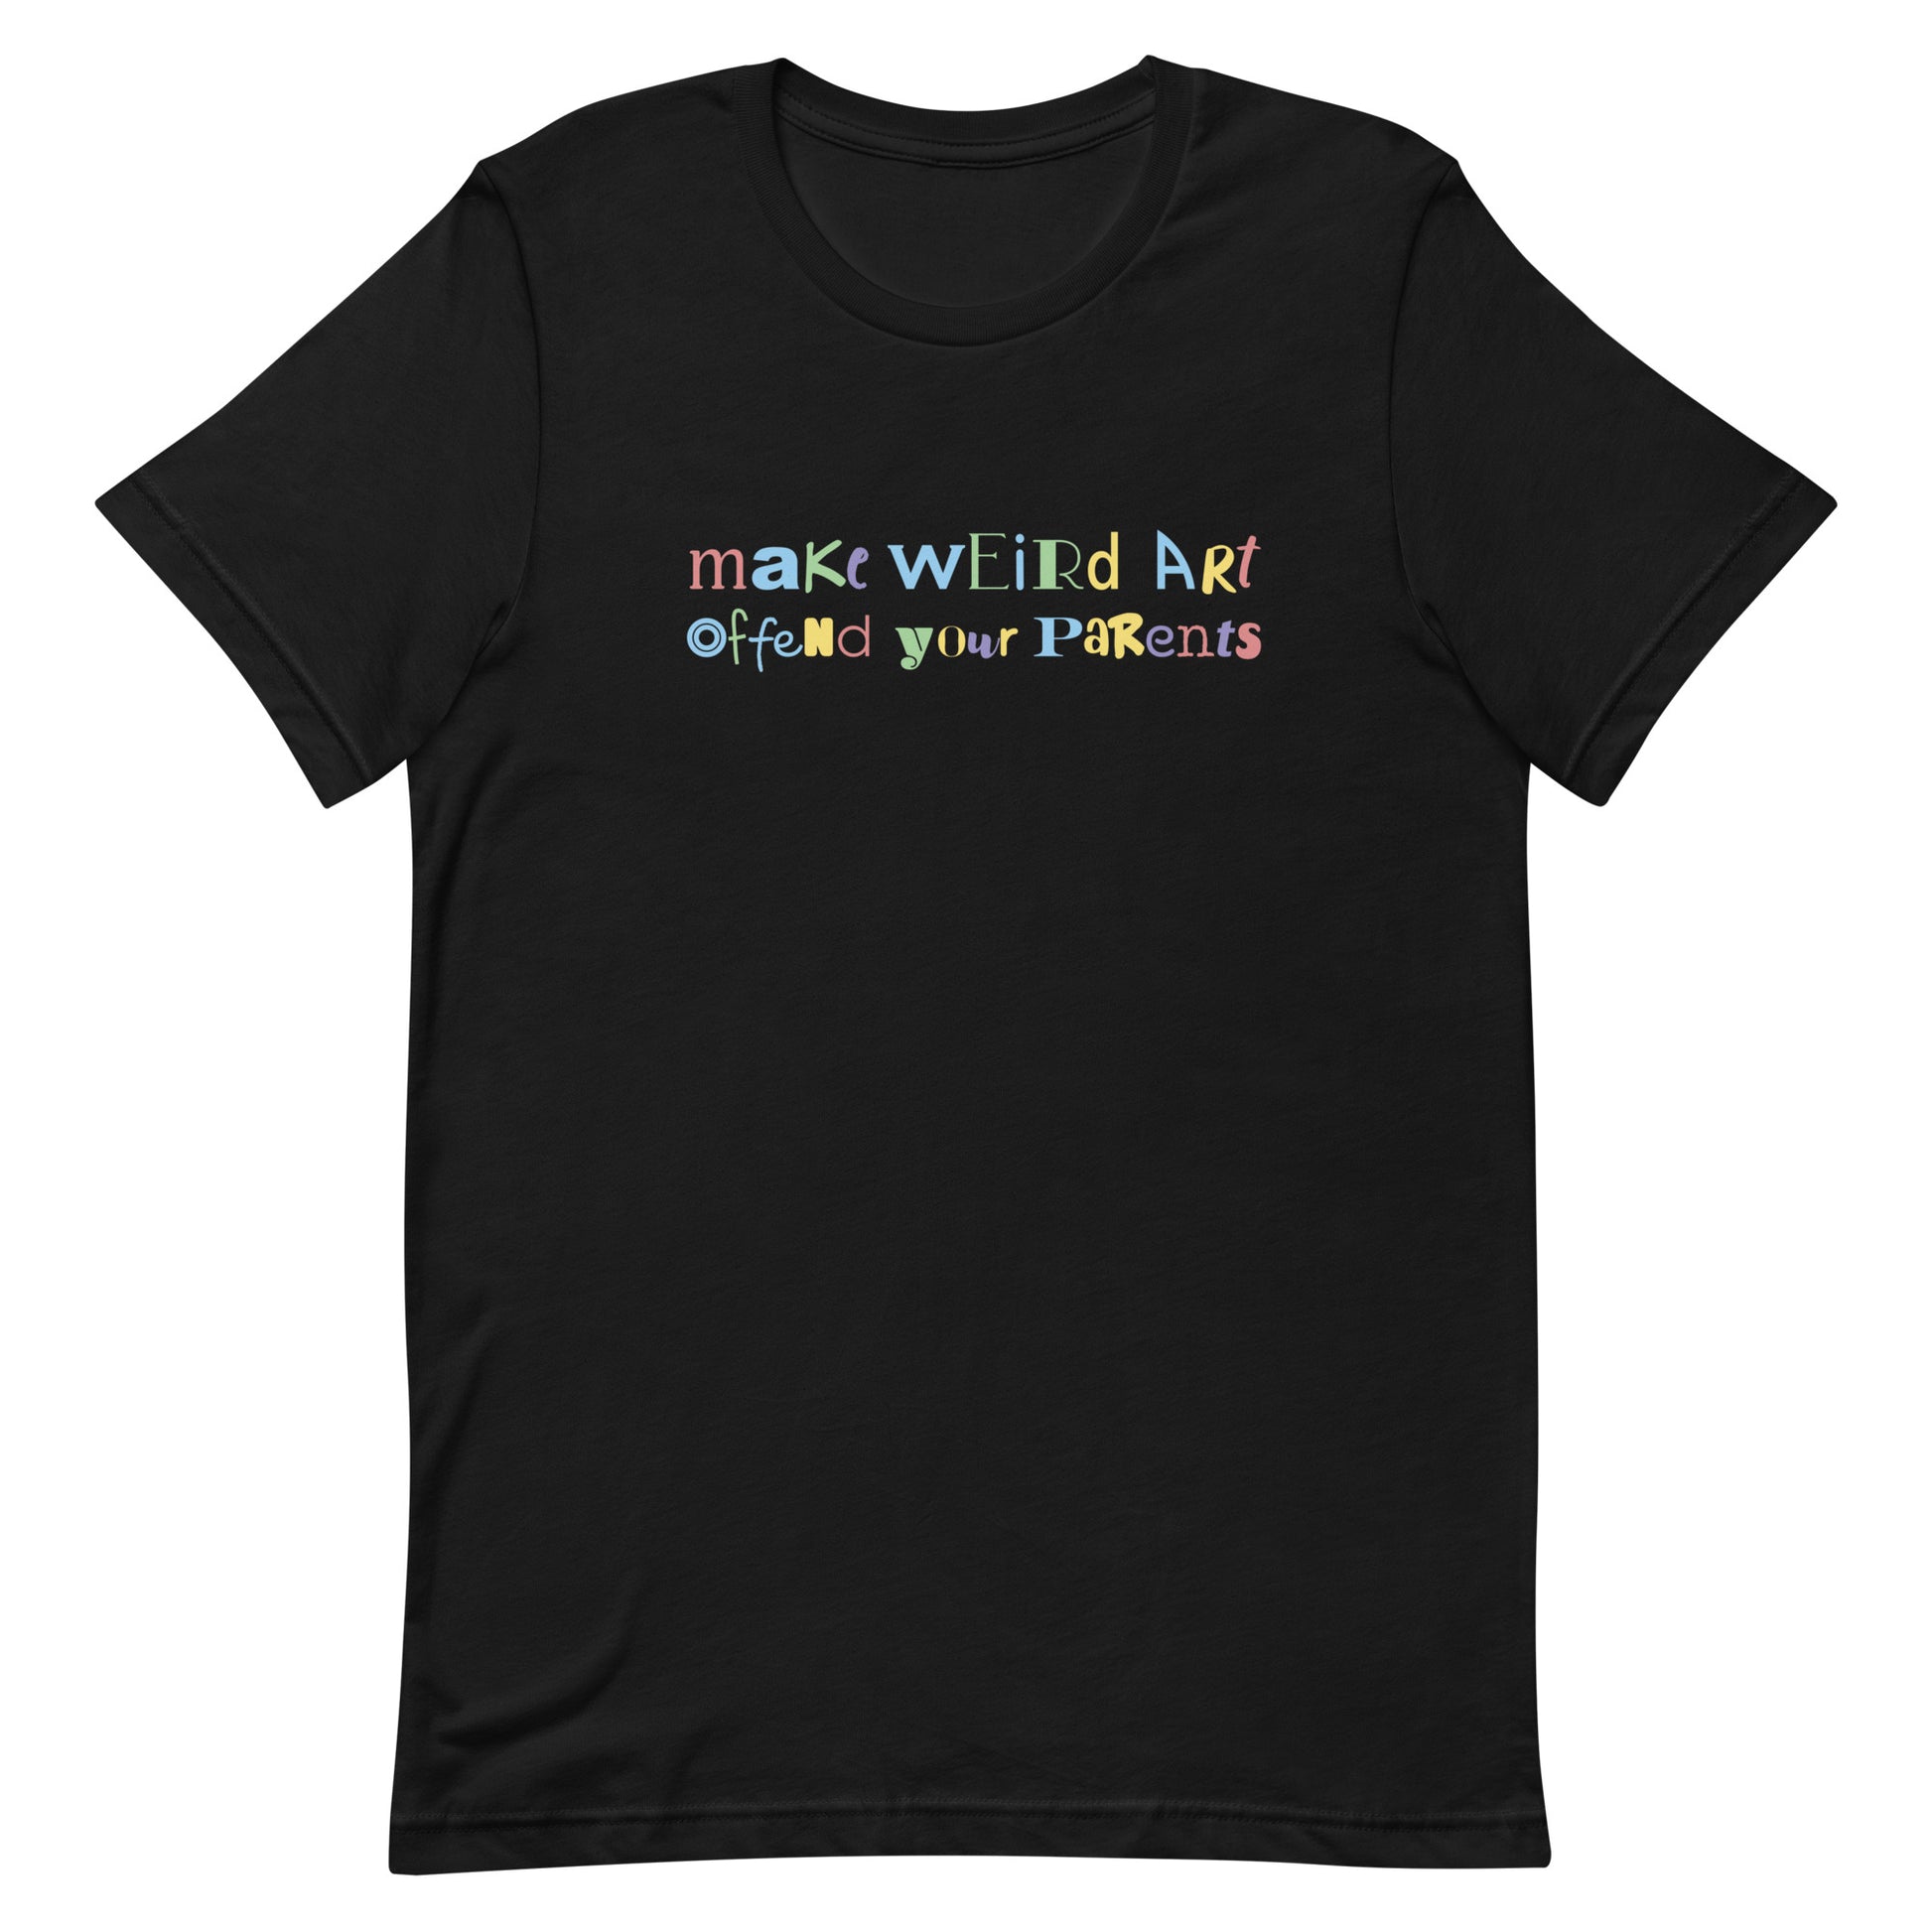 A black crewneck t-shirt with text that reads "make weird art, offend your parents". The text is a scrambled collection of different colors and fonts.